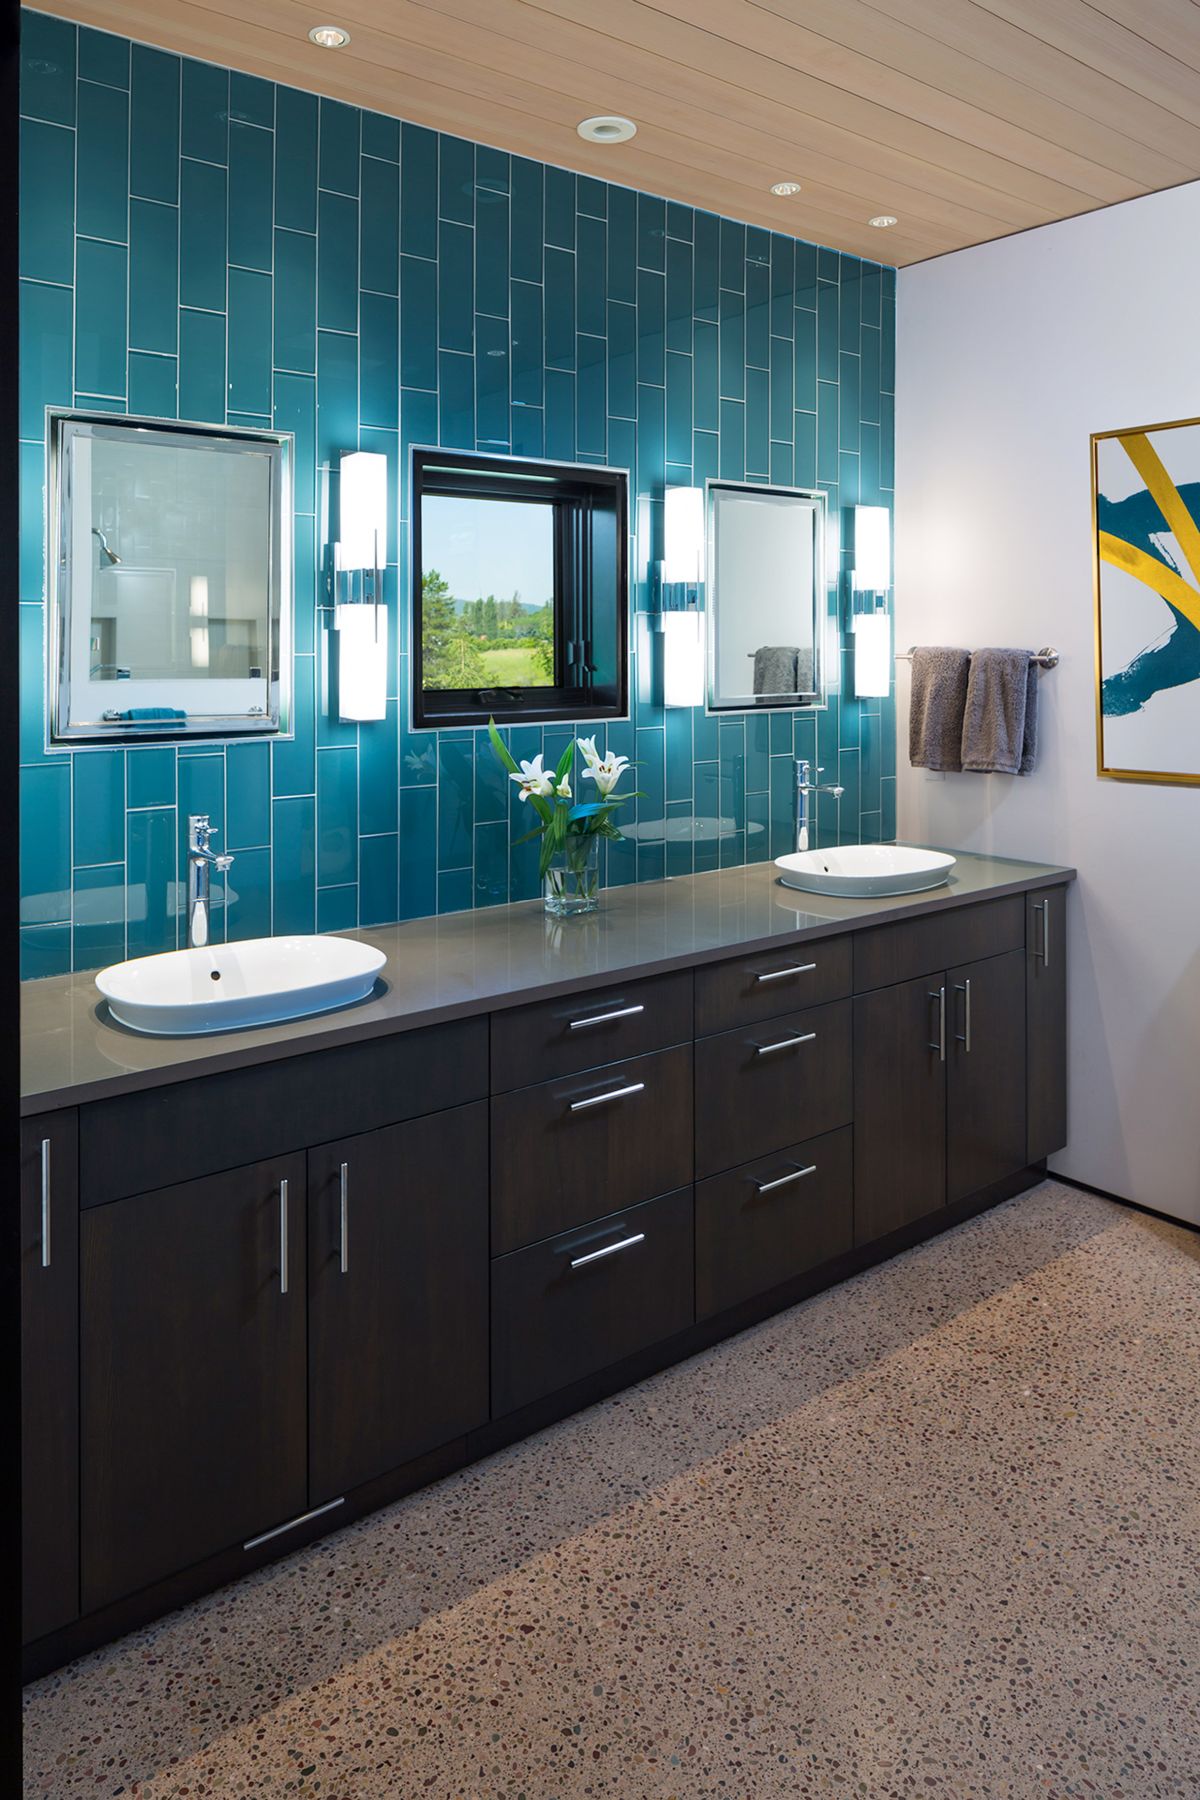 The main bathroom has the same turquoise accents as the kitchen